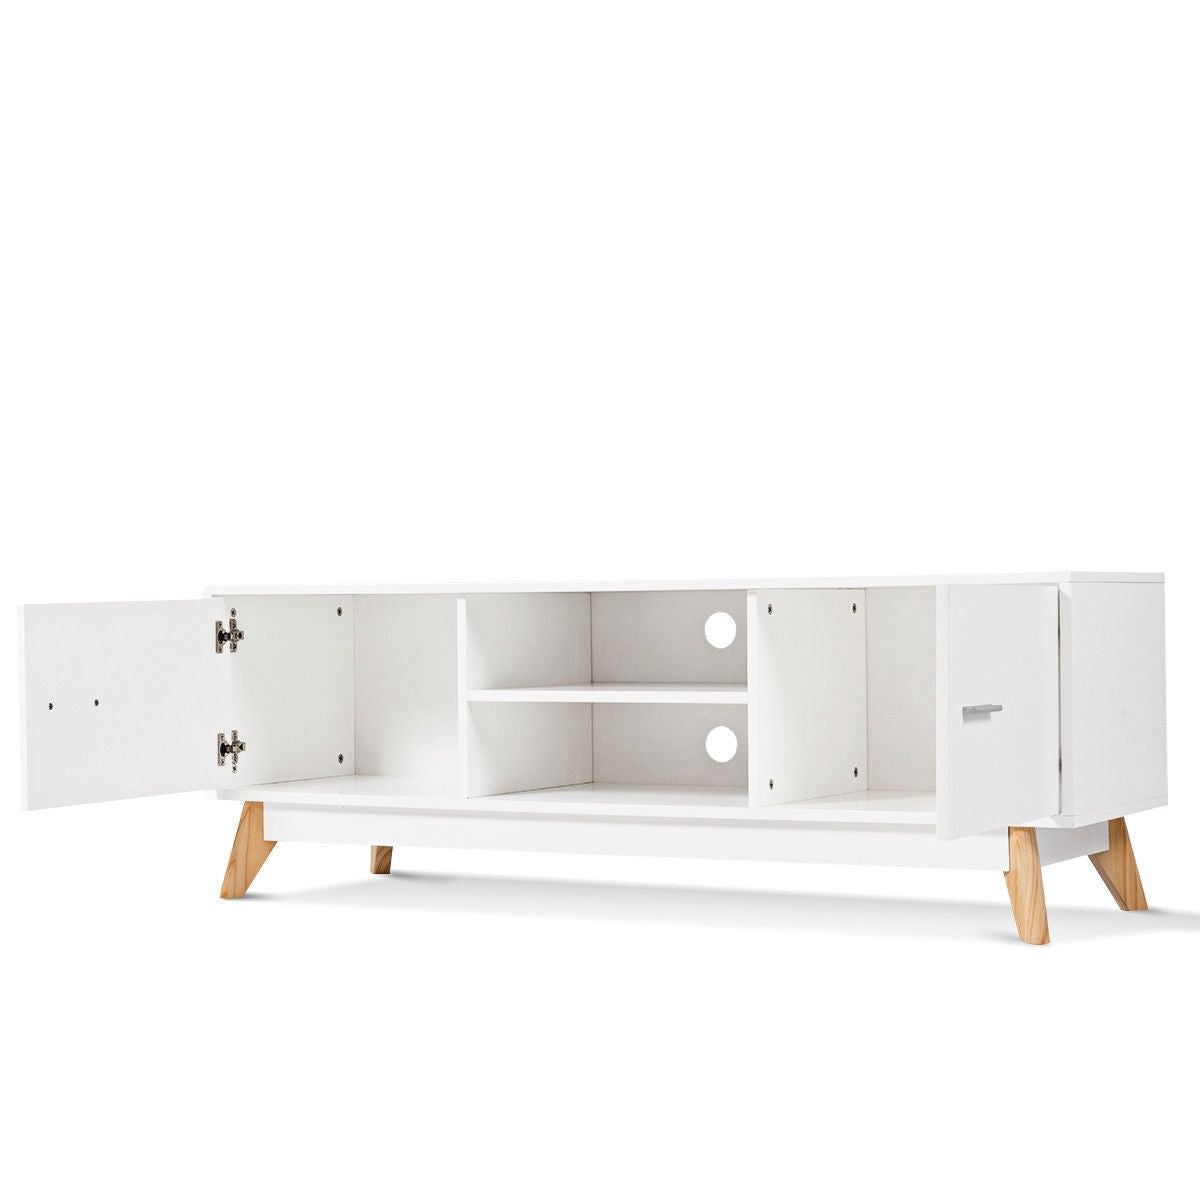 Living Room > TV Stands And Entertainment Centers - Modern Mid-Century Style Entertainment Center TV Stand In White Wood Finish